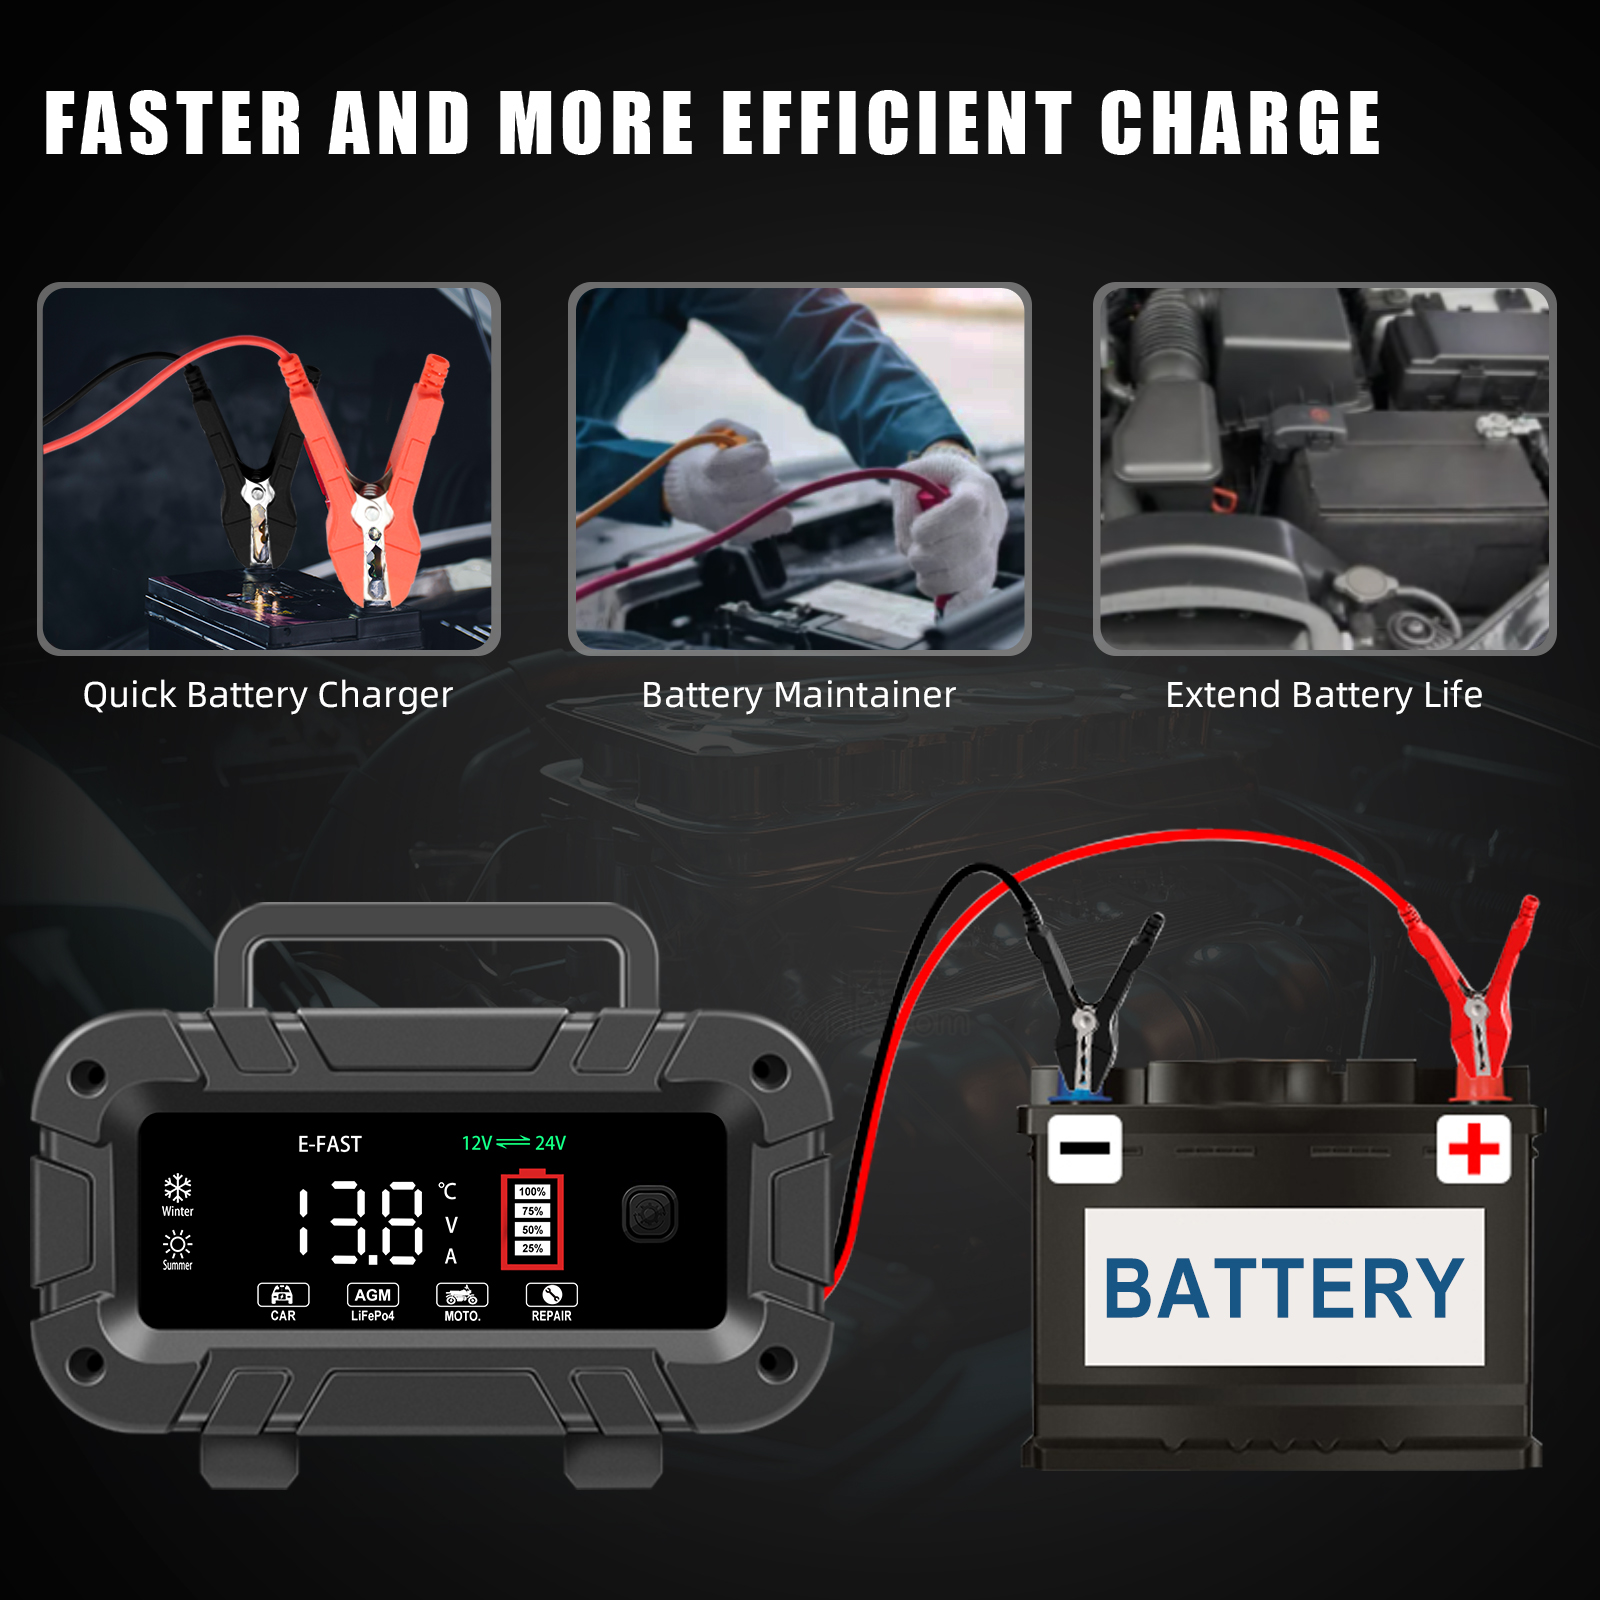 TK-700 Portable Pulse Repair 12V10A 24V5A Lead Acid LiFePO4 Battery Charger Fully Automatic Intelligent for Car Motorcycle Scooter Tricycle